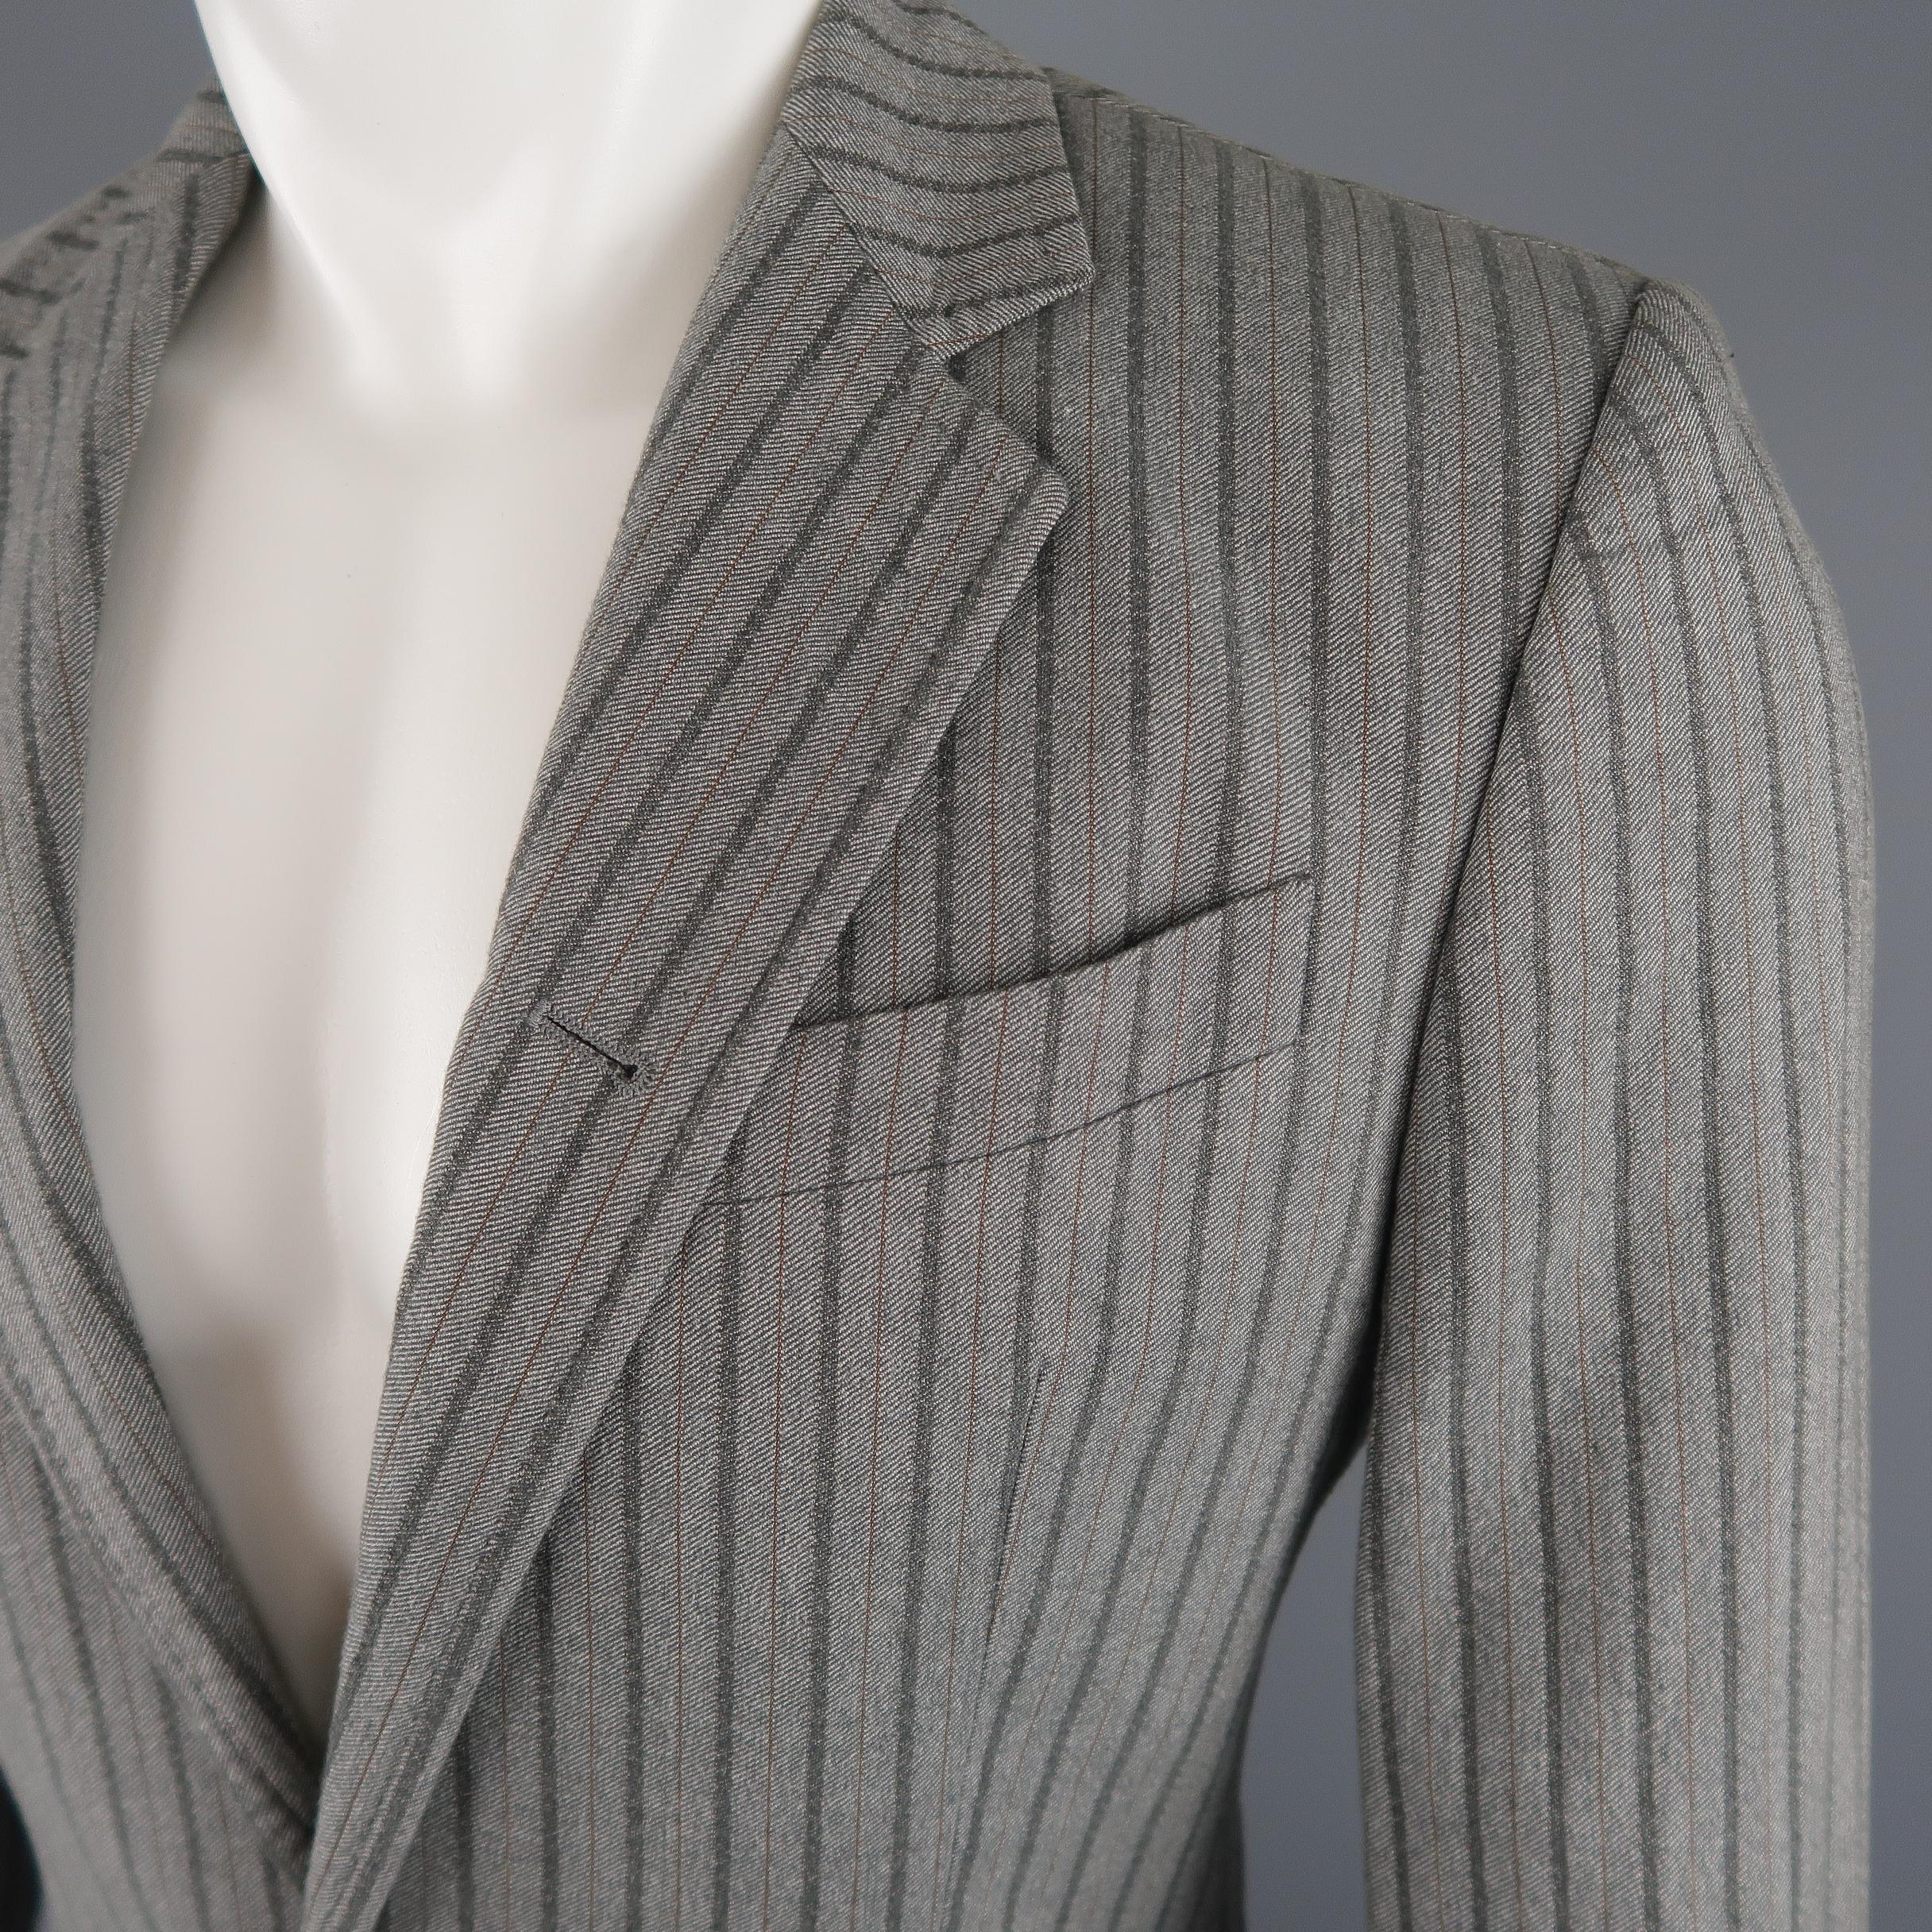 ANN DEMEULEMEESTER sport coat comes in light gray striped cotton blend fabric with a notch lapel, two button , single breasted front, and functional button cuffs.
 
Excellent Pre-Owned Condition.
Marked: S
 
Measurements:
 
Shoulder: 17 in.
Chest: